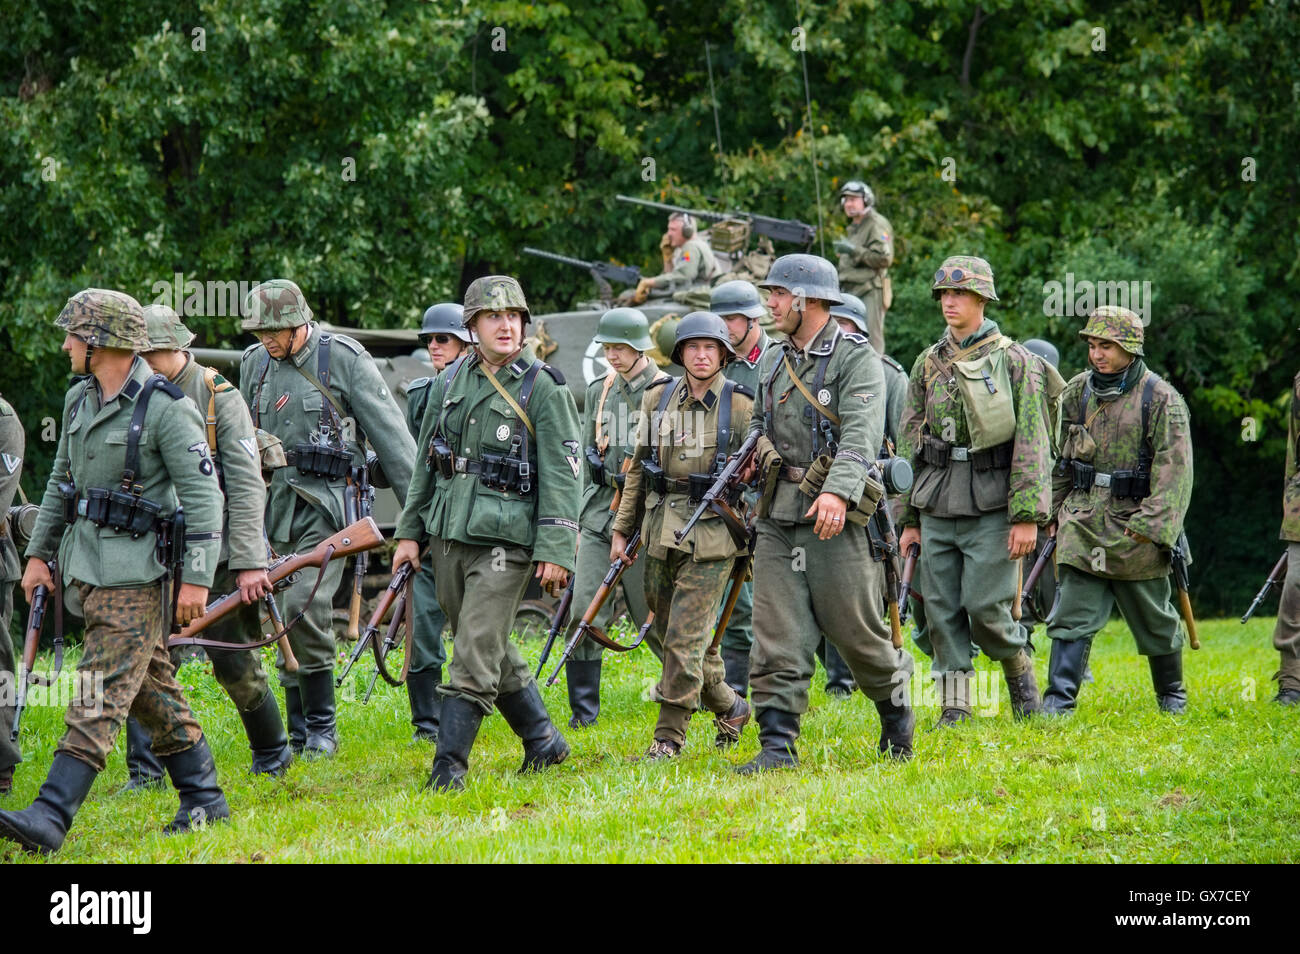 German Infantry on the march. Shot at 'World War 2 Days' history re-enactment event held at Dellwood Park, Lockport, IL Stock Photo